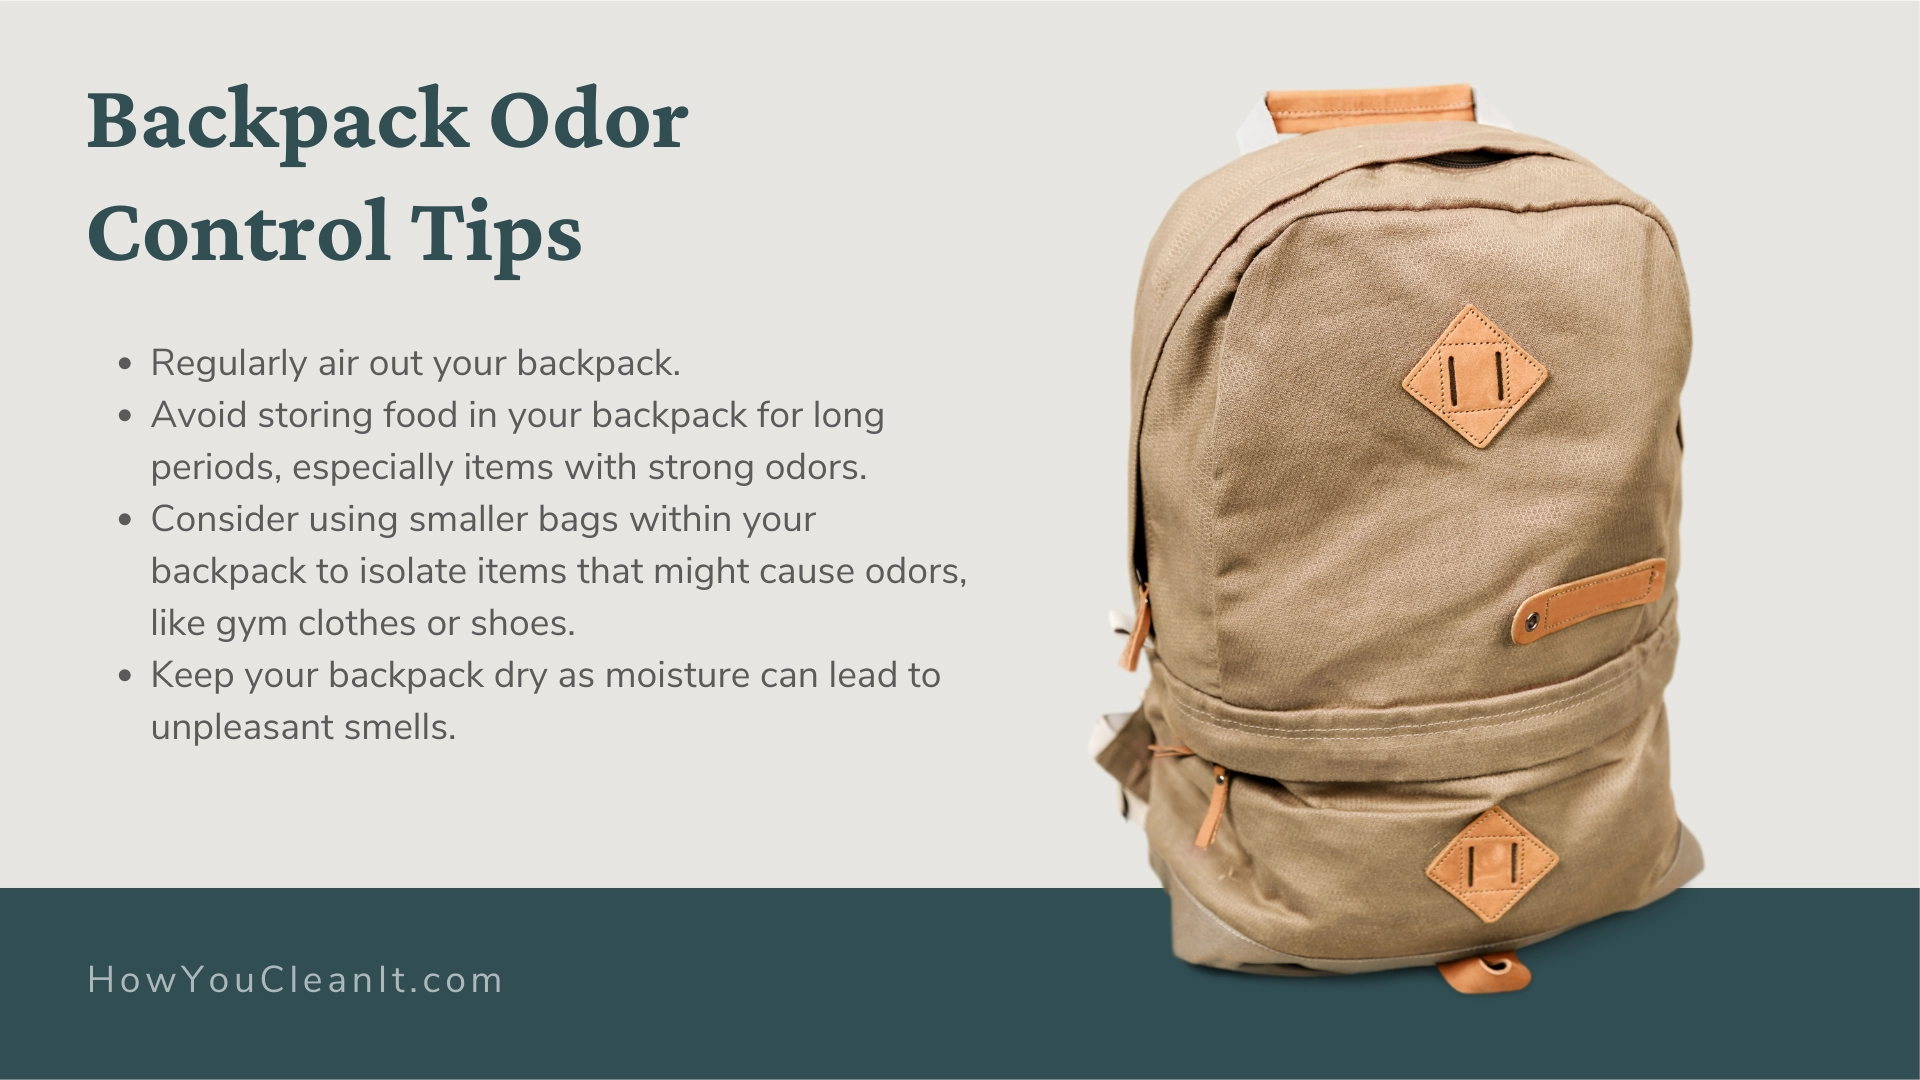 how to deodorize backpack without washing
